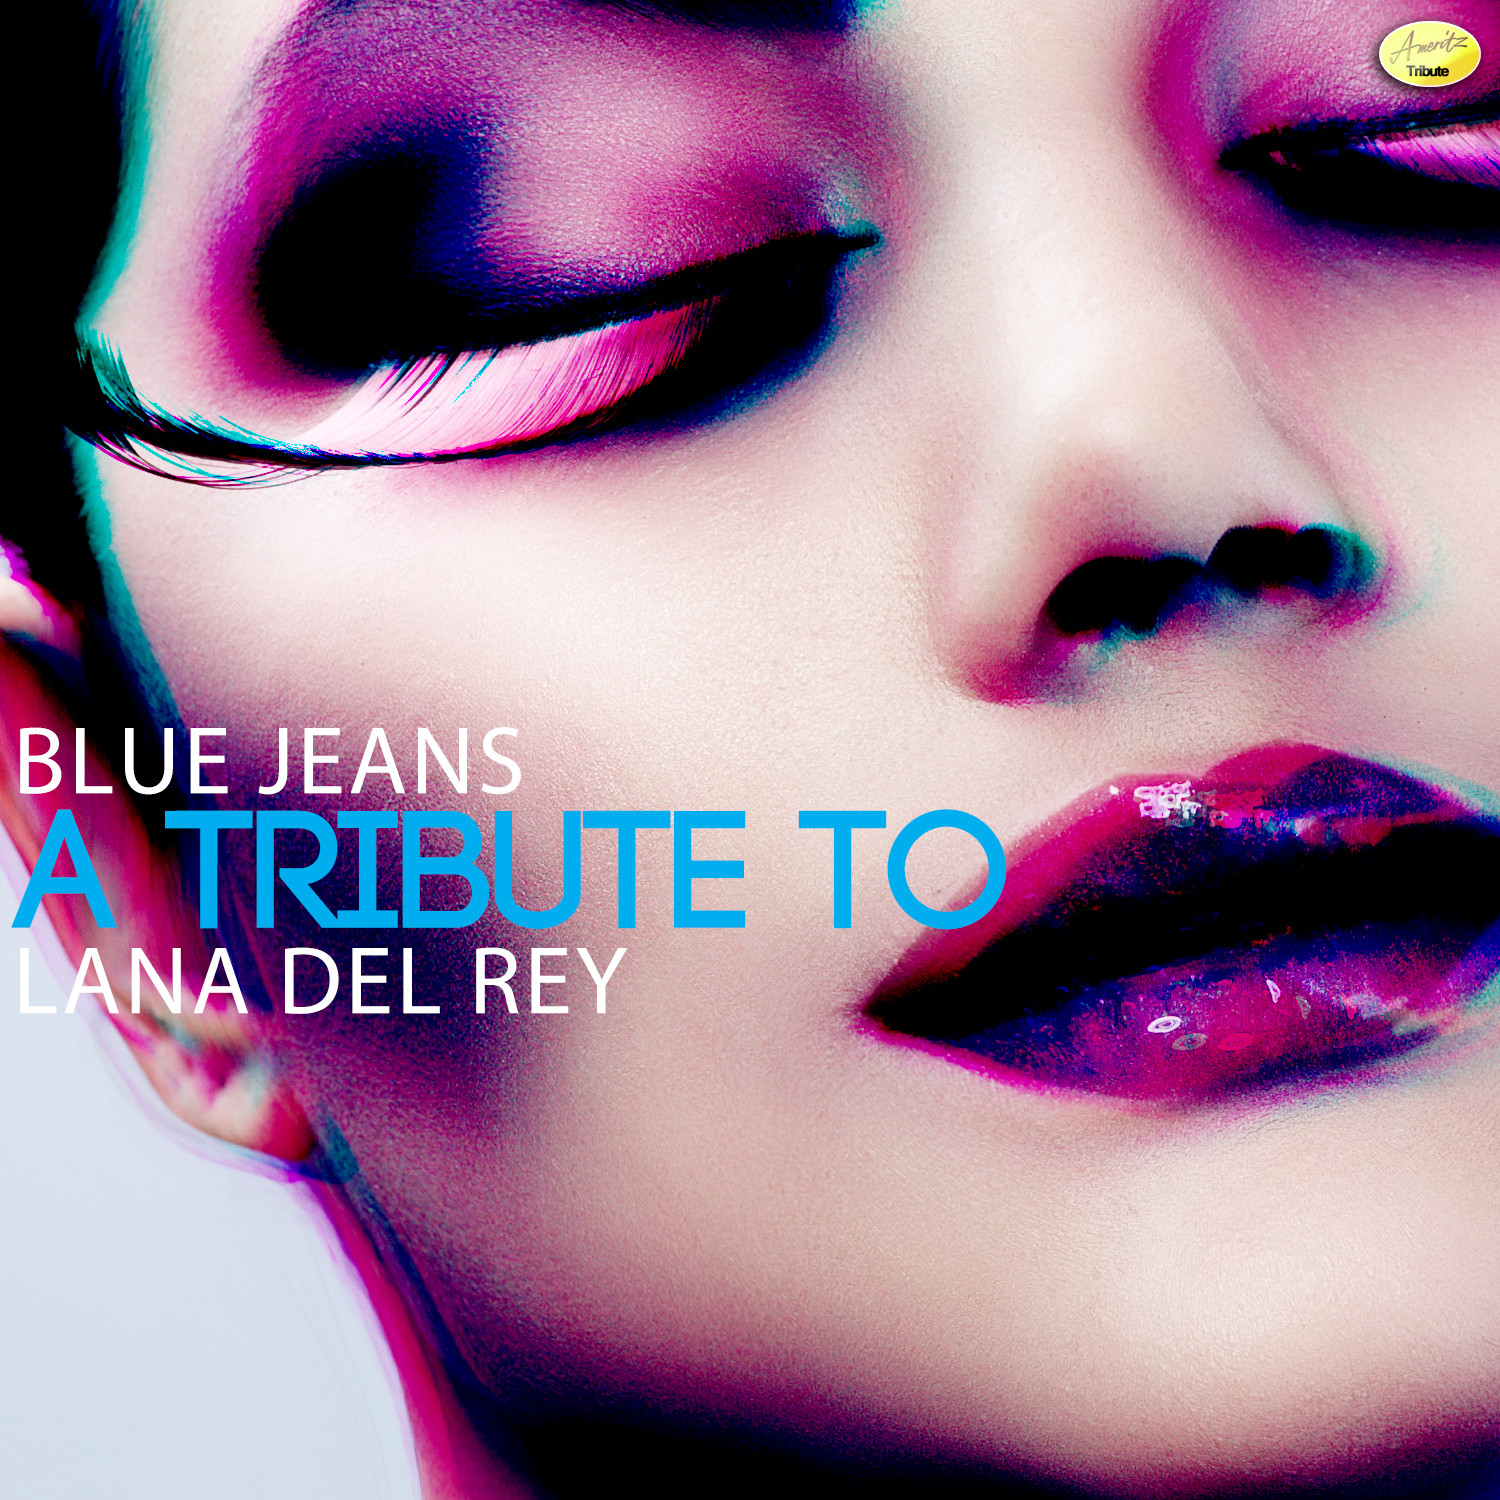 Blue Jeans - A Tribute to Lana Del Rey